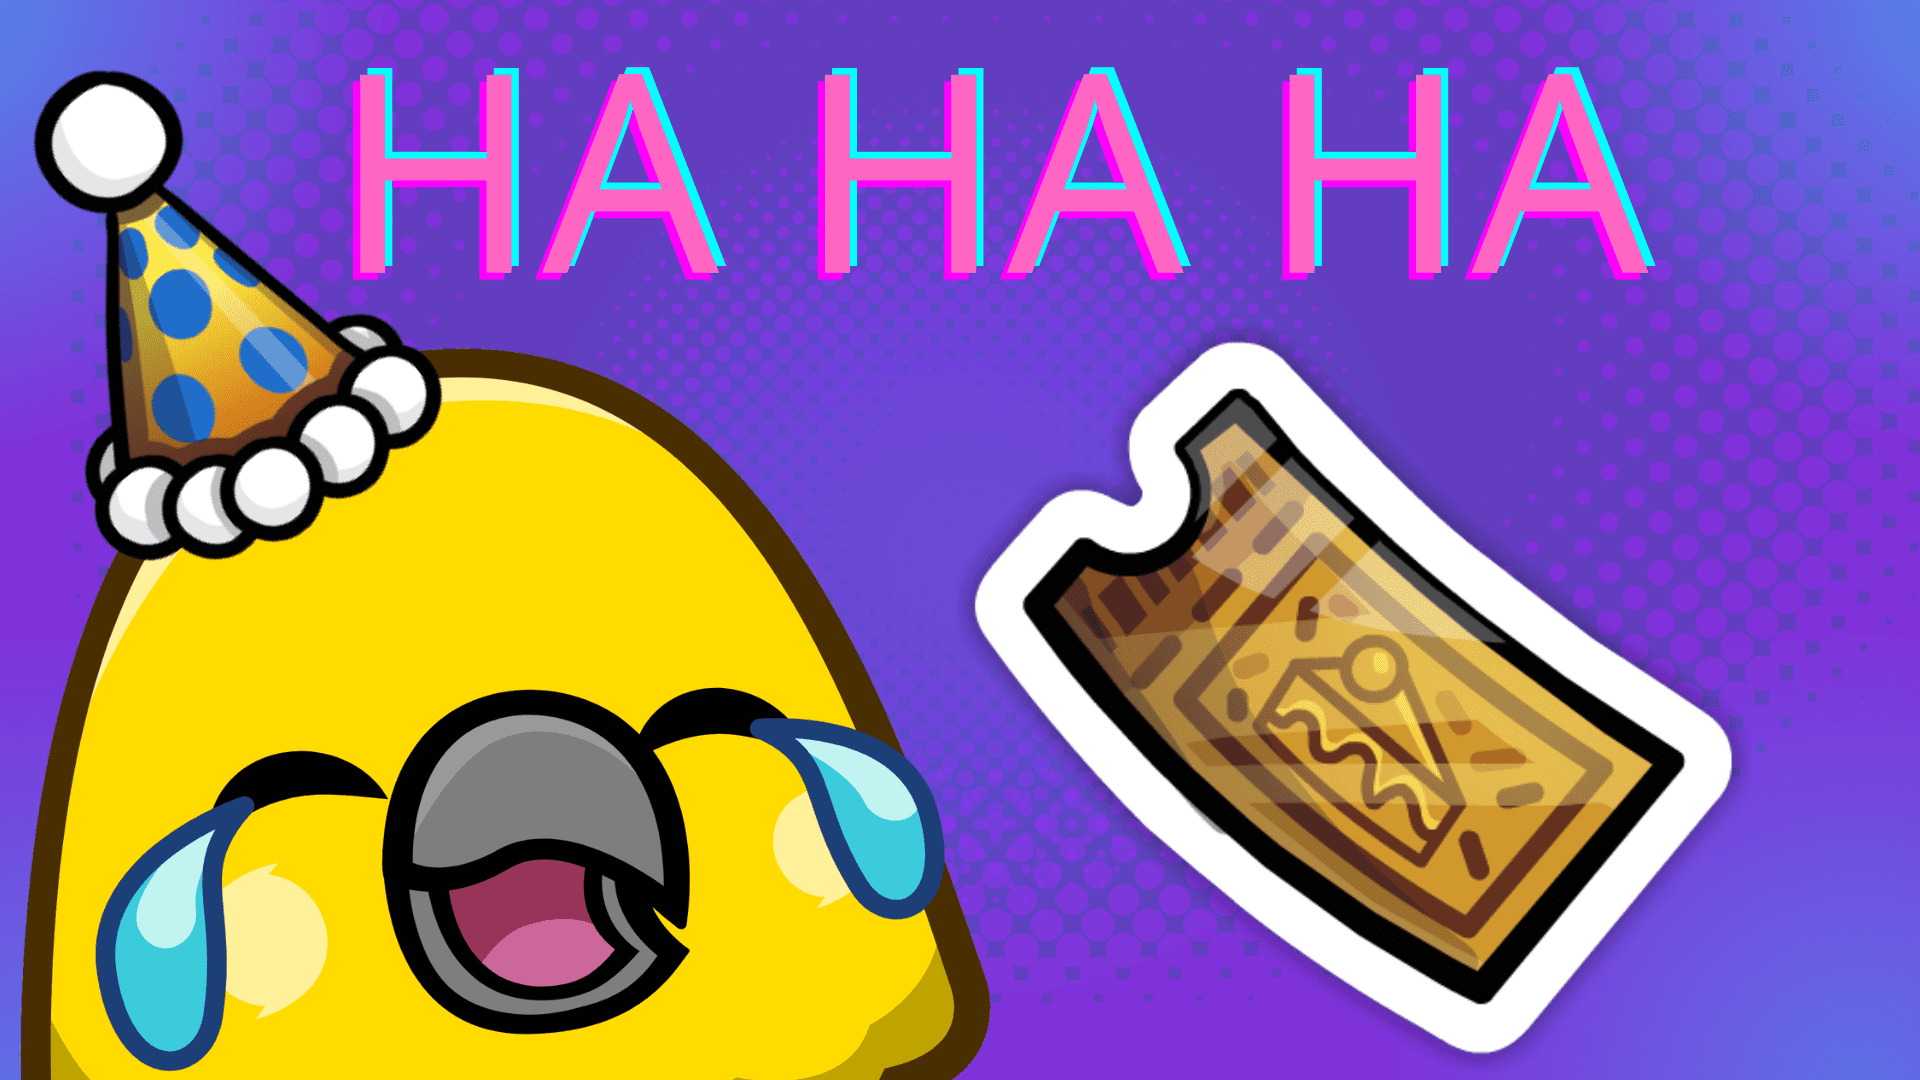 A yellow parrot emote laughing and crying. It wears a sunset party hat. Text says "HA HA HA" with a golden cake slice ticket. It prepares you for really funny birthday jokes for kids!